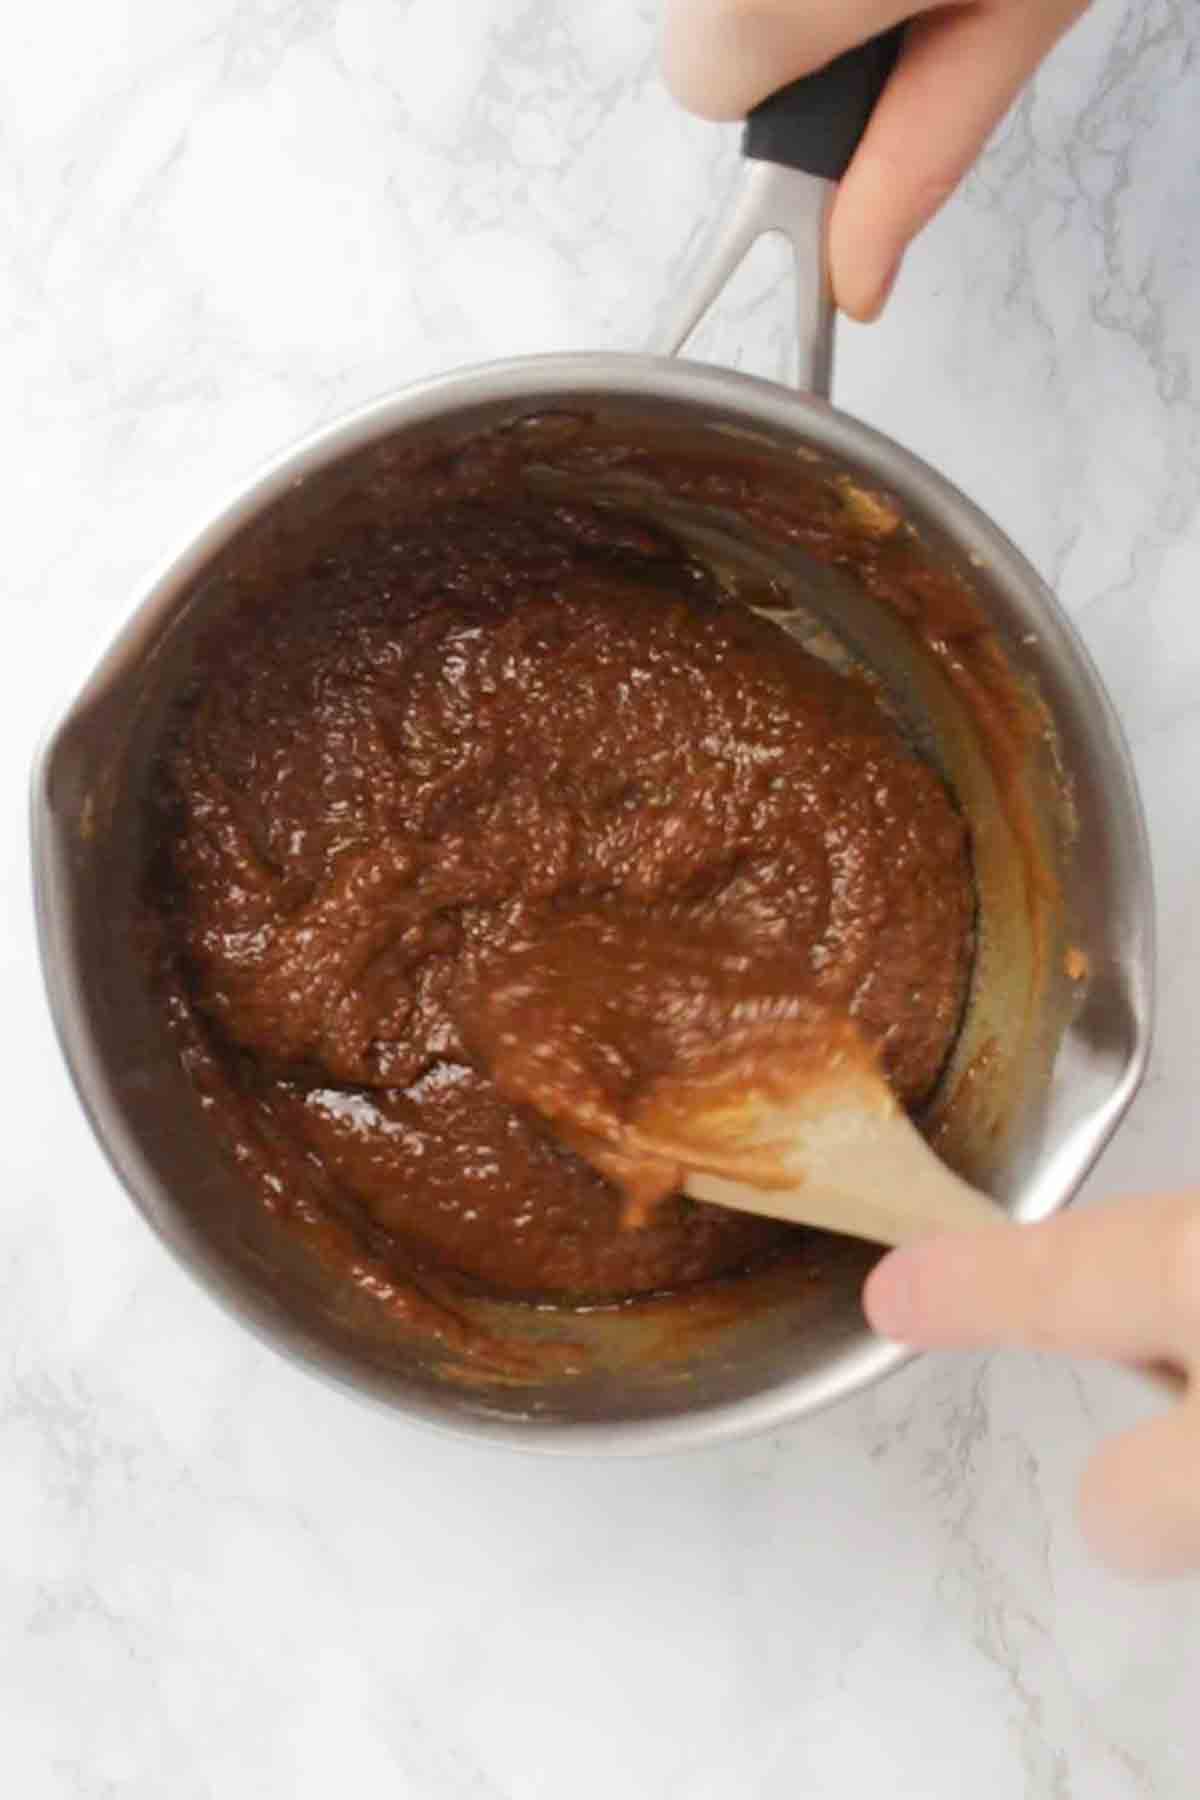 Wet Biscoff And Brown Sugar Mixture In A Pan